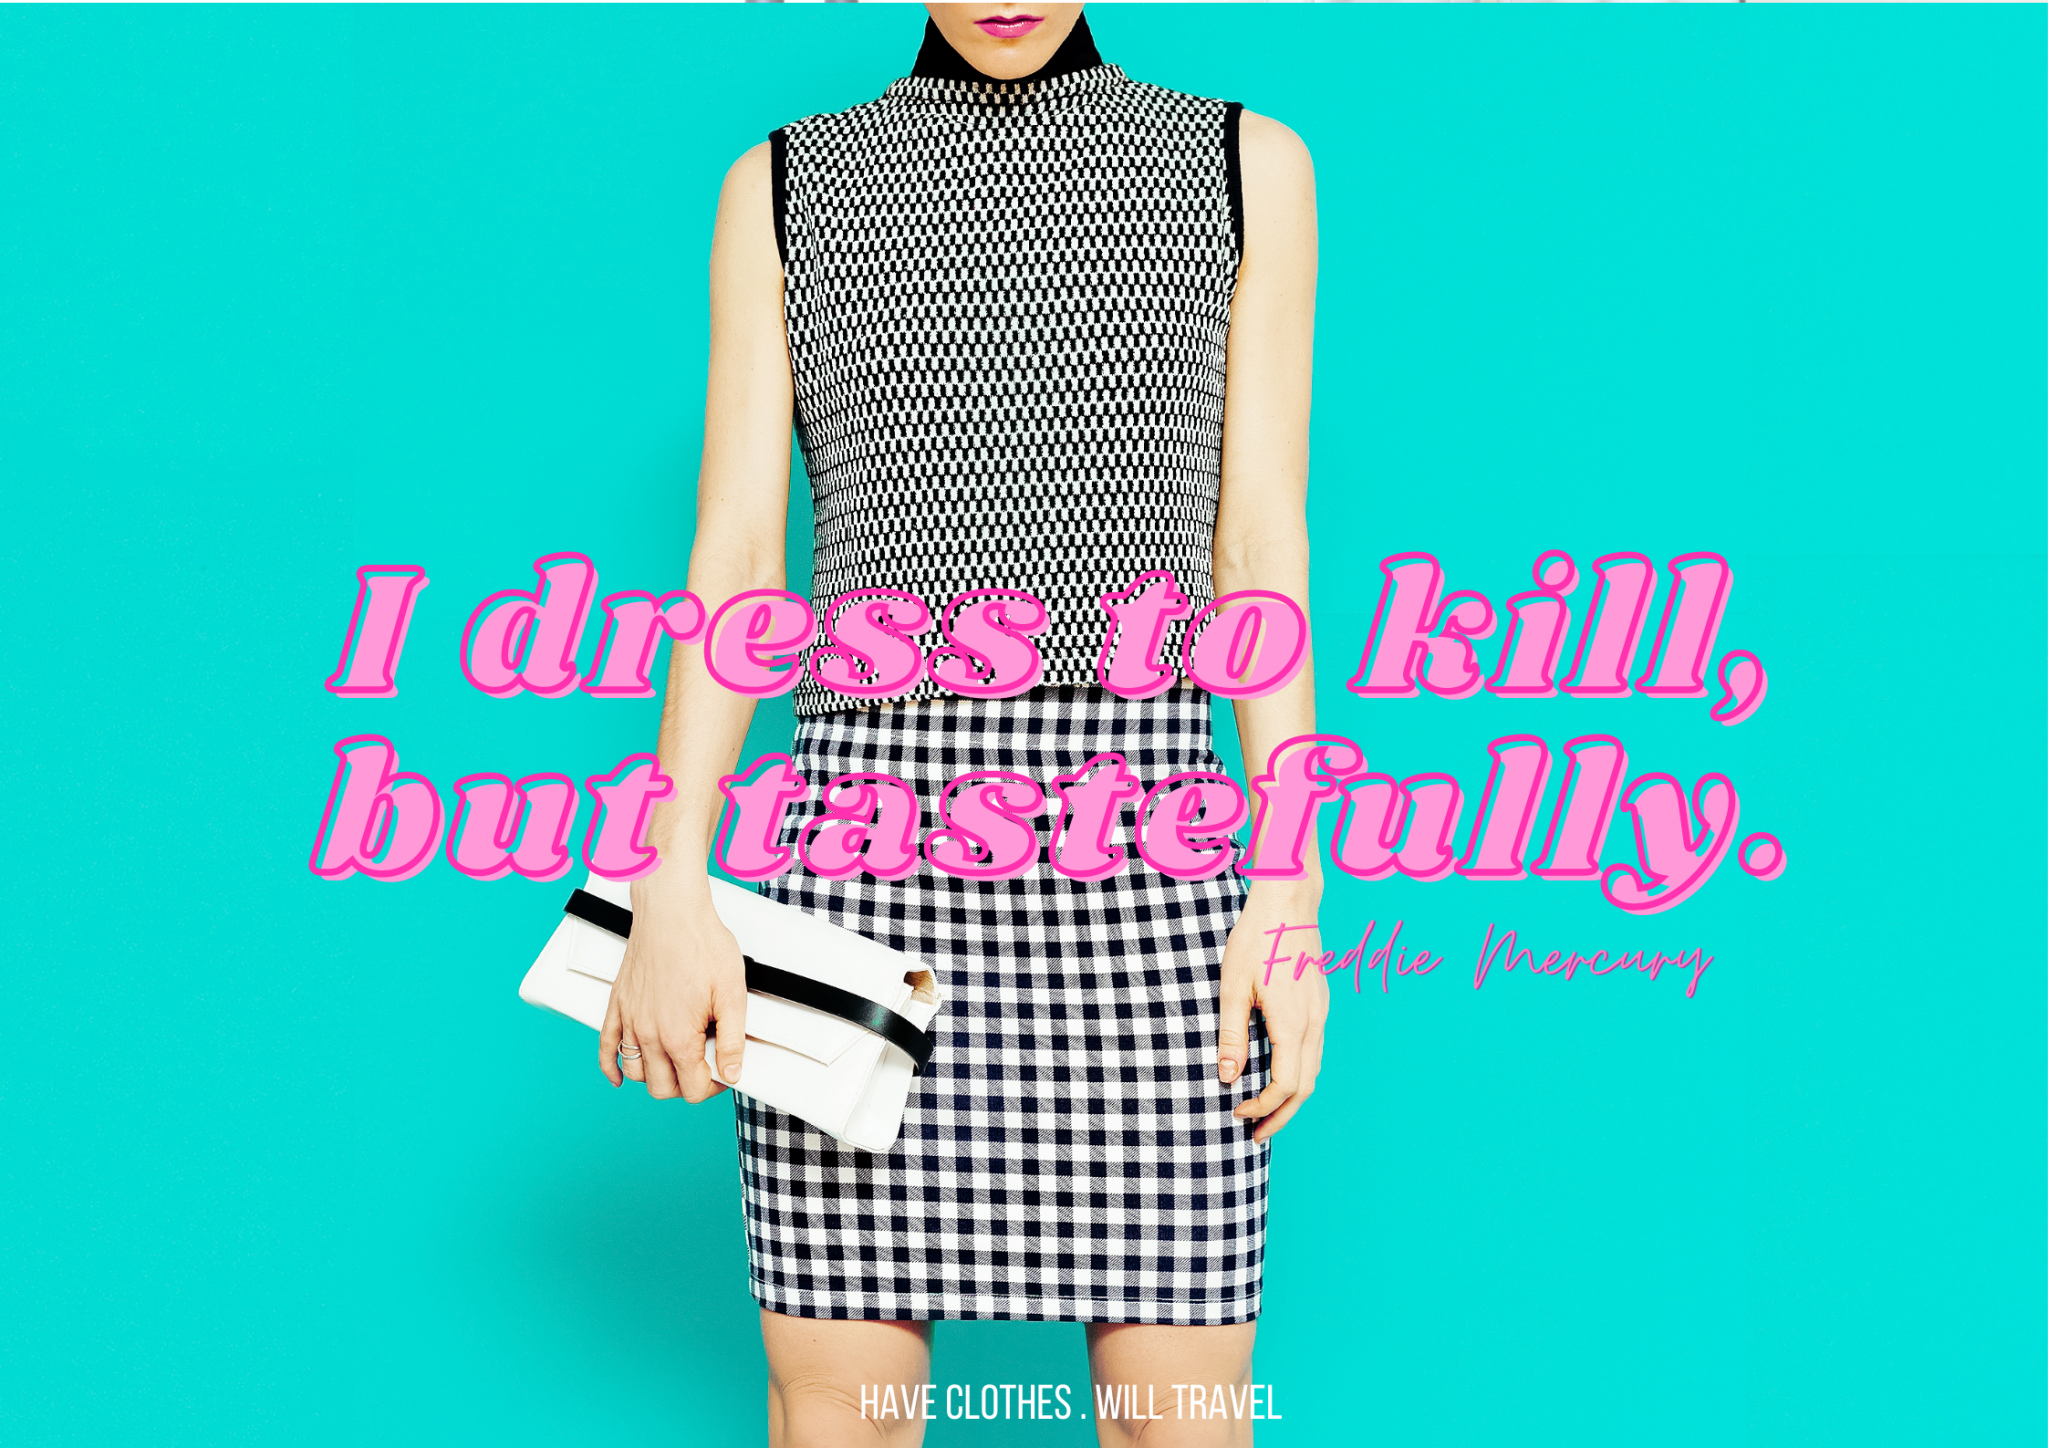 A model poses in front of a bright blue background wearing a black and white patterned shirt and shirt. Pink retro-style text across the center of the image says "I dress to kill, but tastefully. - Freddie Mercury"